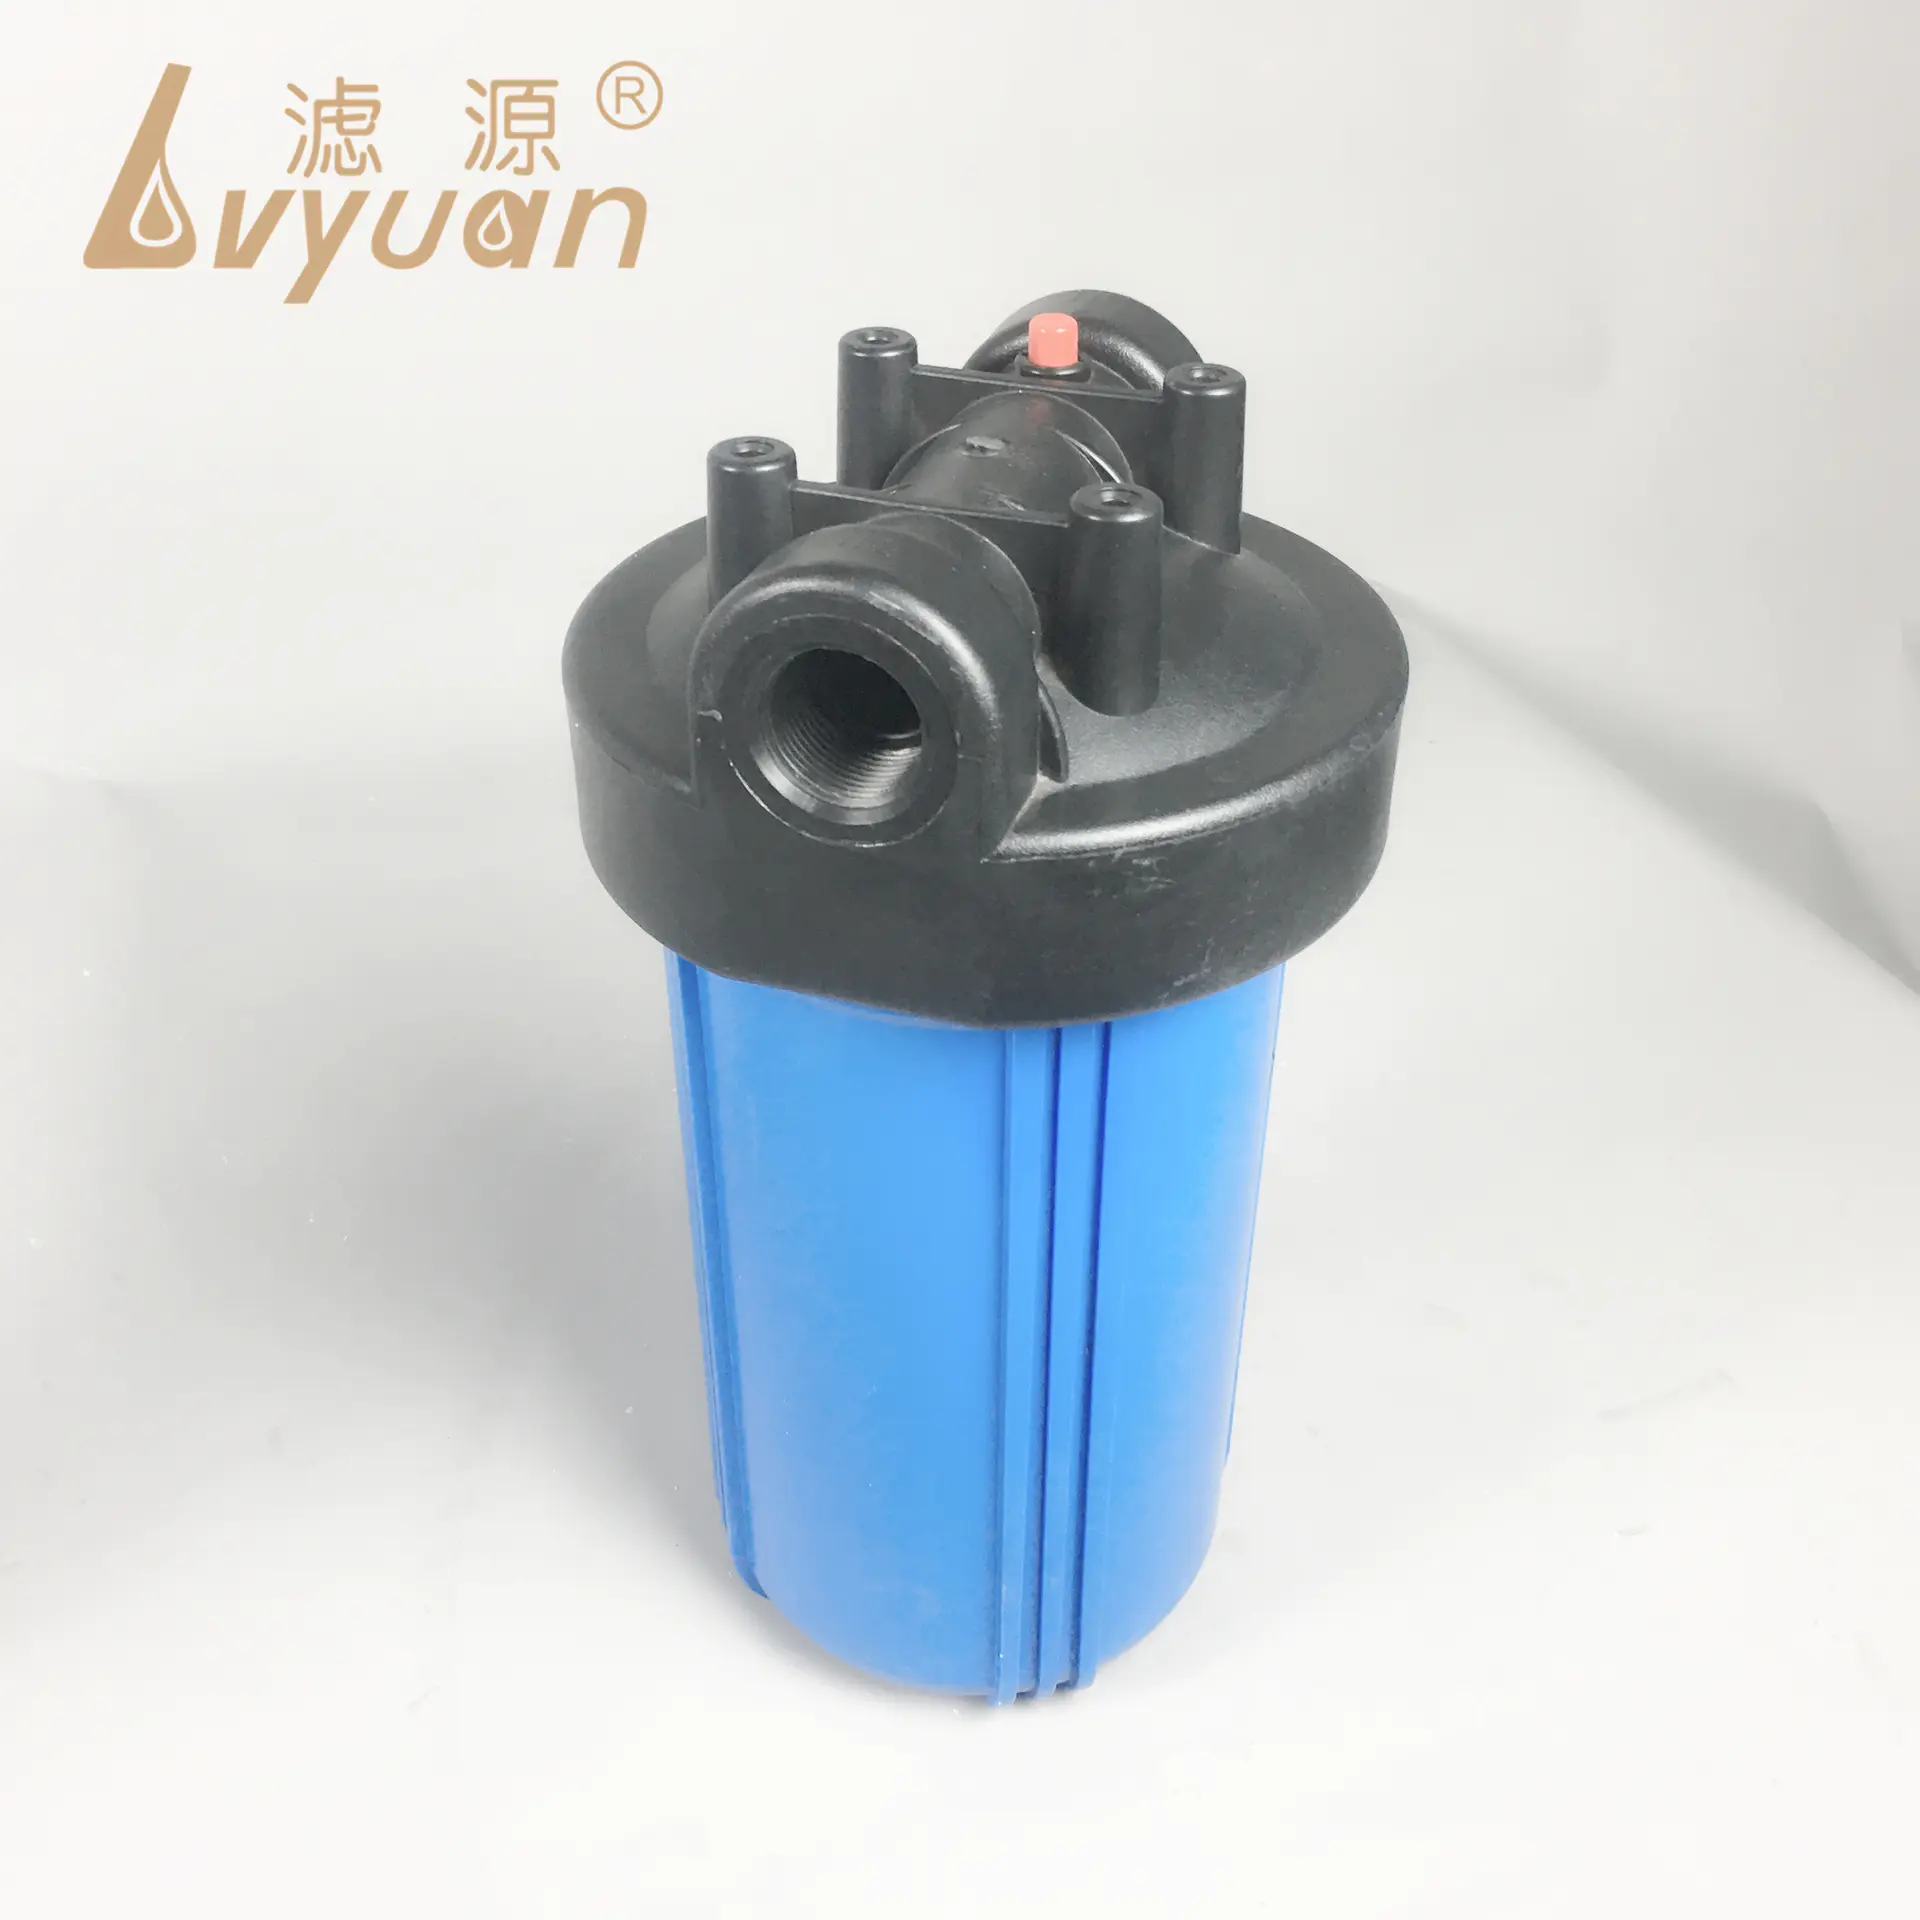 Water filter housing 5 10 inch 20'' big blue filter housing for water treatment/water filtration